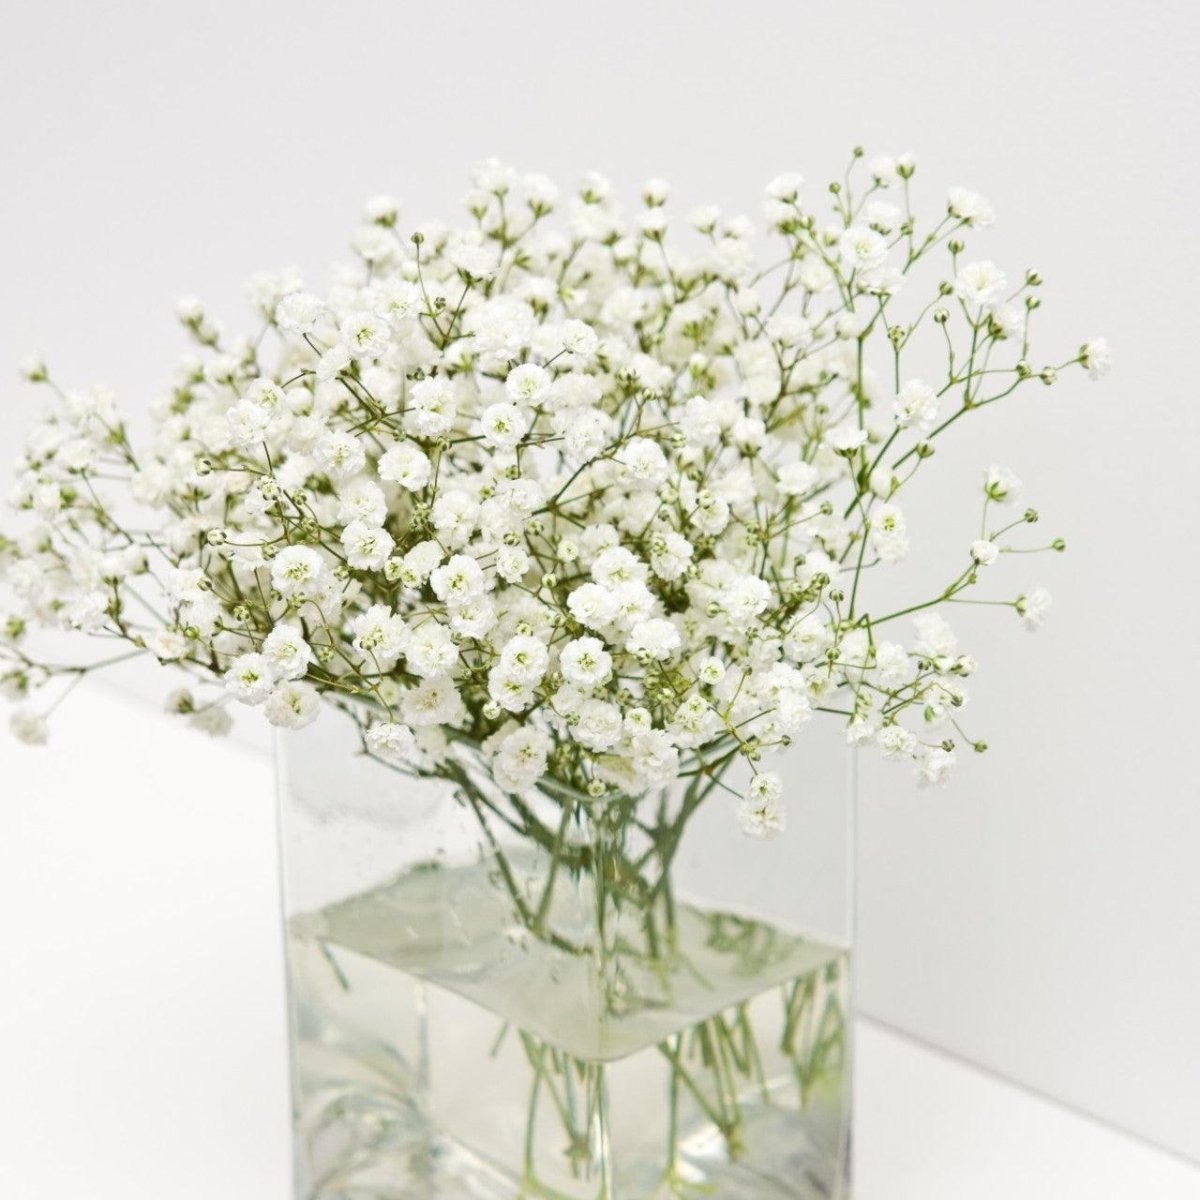 Wholesale Baby's Breath - Million Star White / 8 Bunches